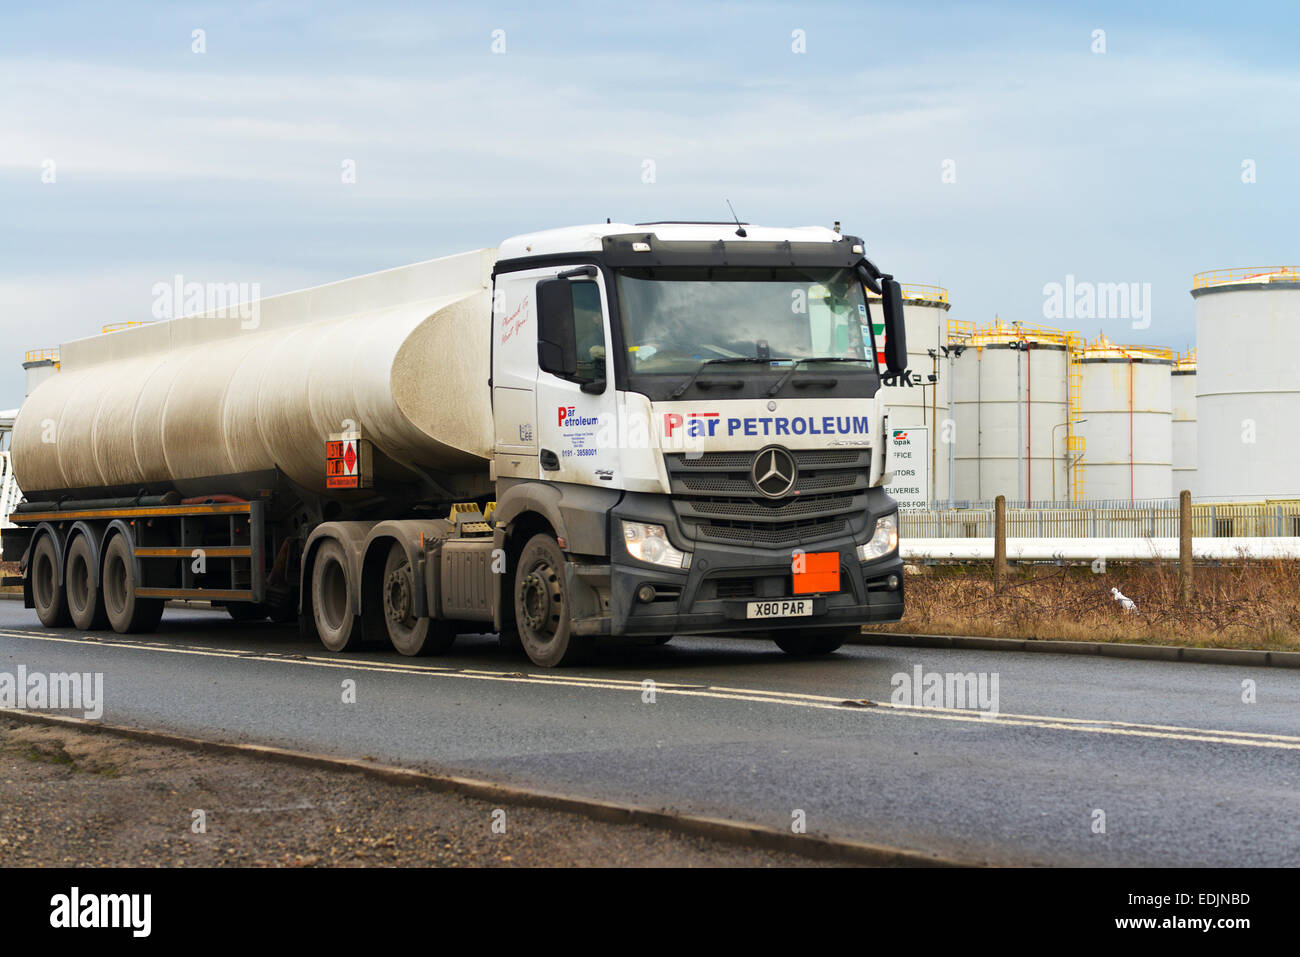 Seal Sands Oil Terminal, Teesside, UK. 7th January 2015. A petrol tanker leaves the Vopak Terminal at Seal Sands on Teesside to distribute petrol to a network of petrol stations across the UK. Brent crude oil has hit its lowest price since May 2009 and has fallen below $50 per barrel. Stock Photo